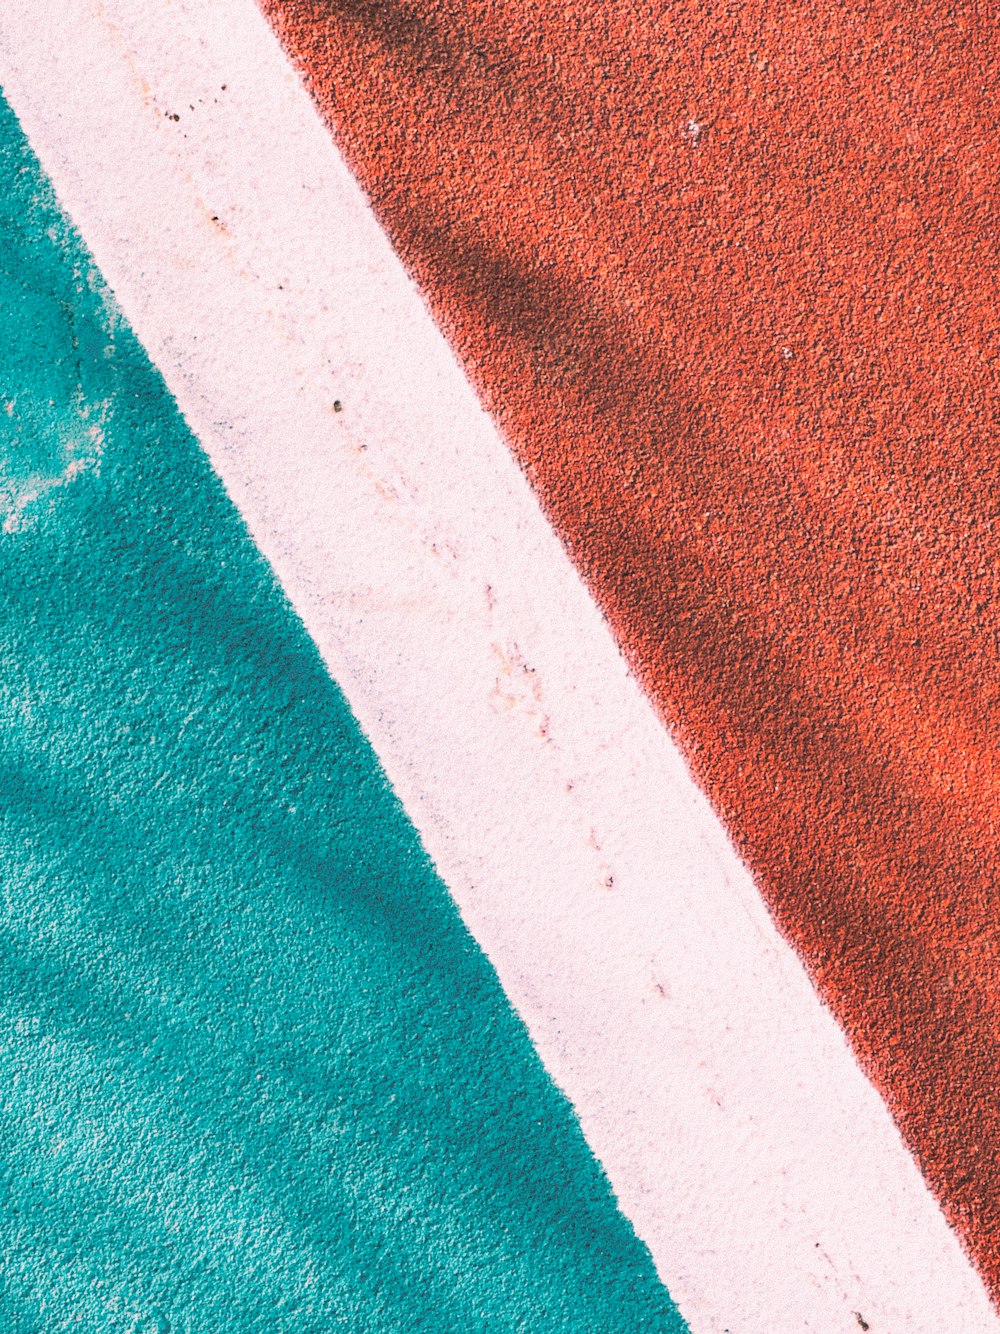 a close up of a red, white and blue towel